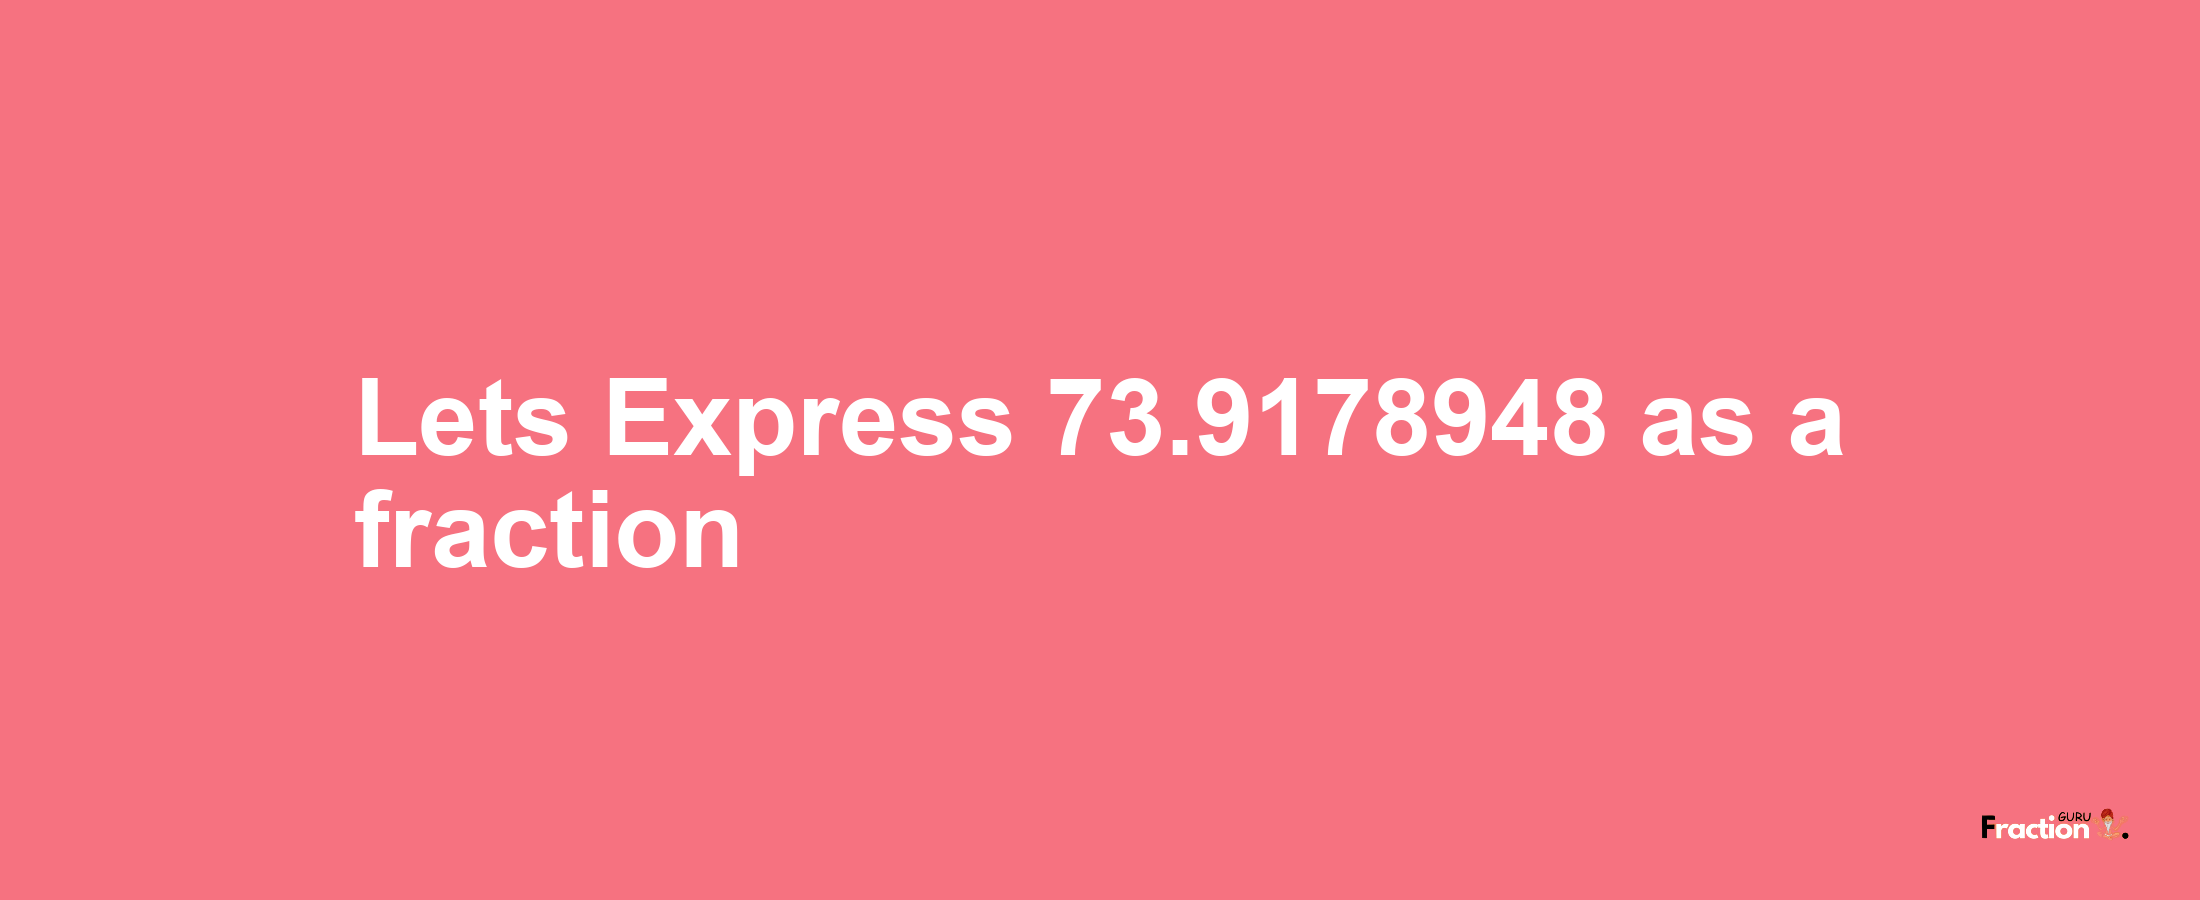 Lets Express 73.9178948 as afraction